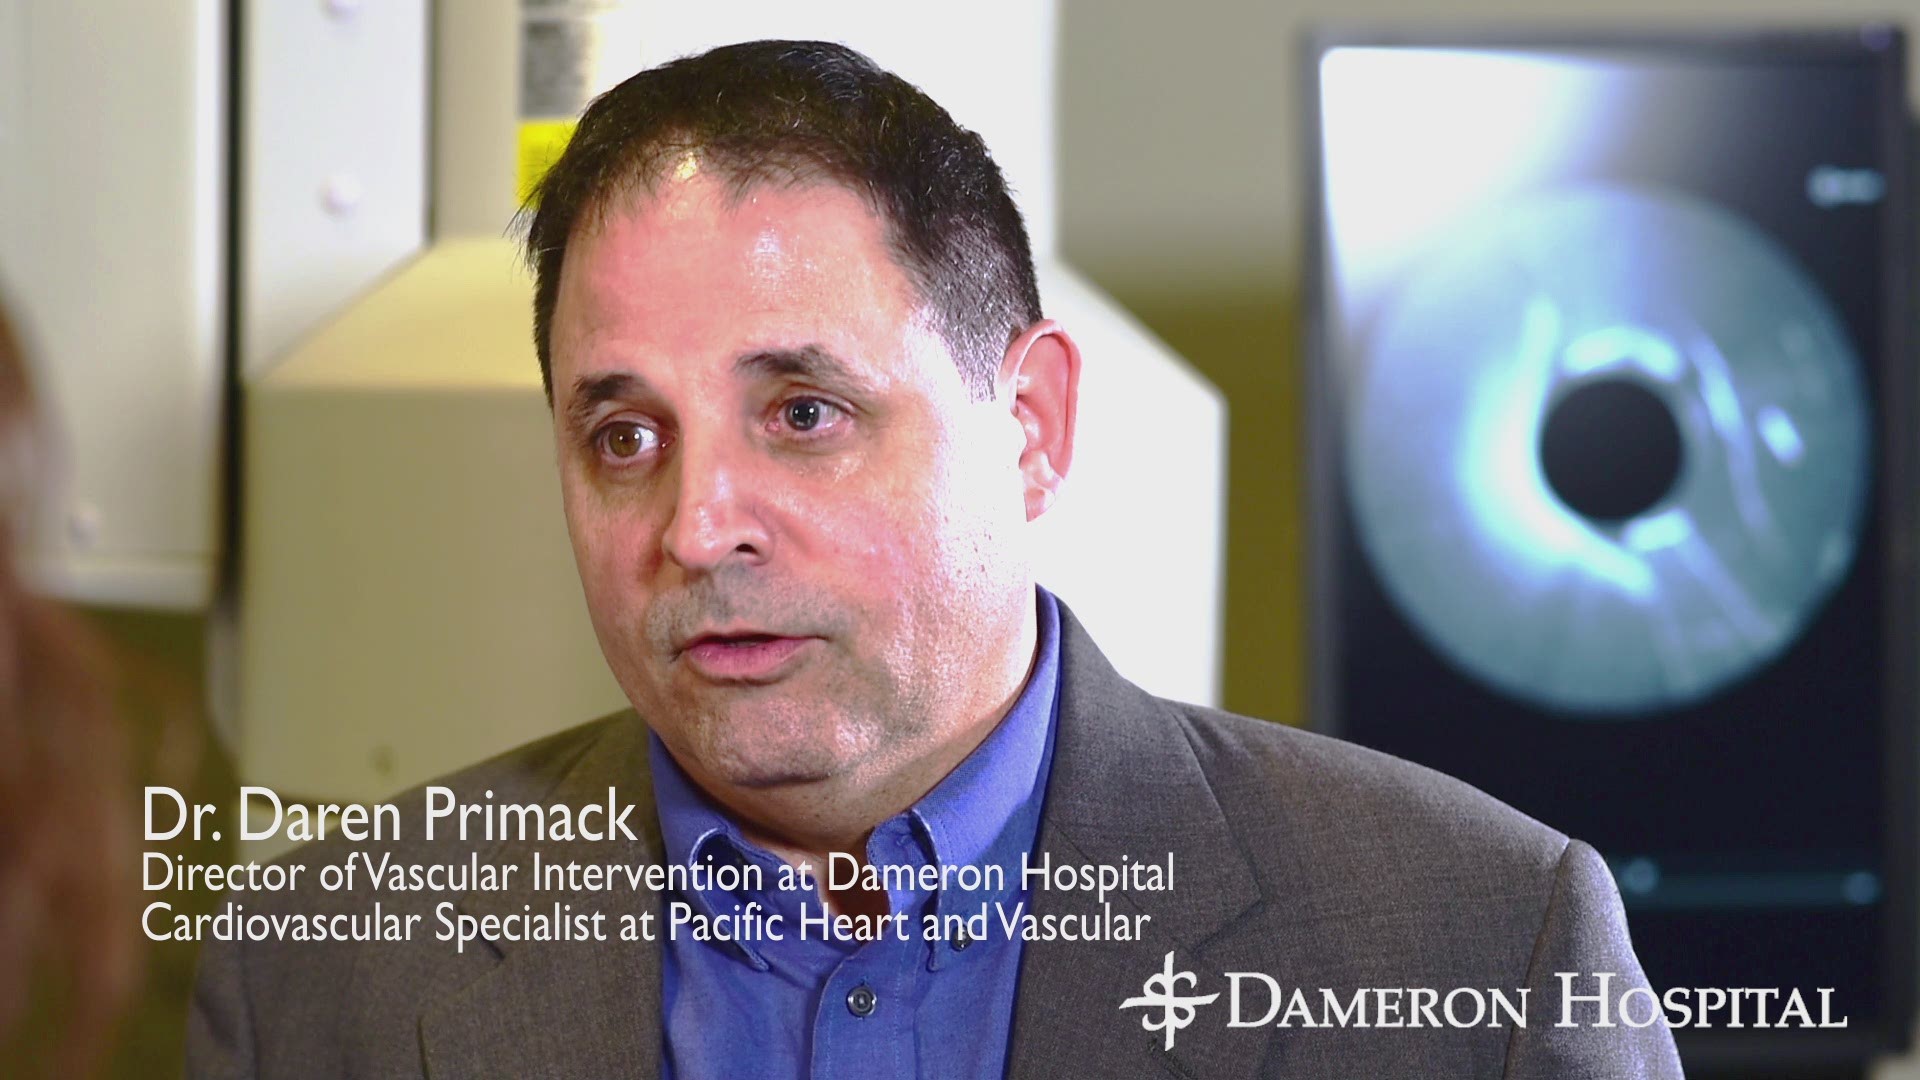 ABC10's Medical Minute is sponsored by Dameron Hospital. Excellence in Cardiovascular Care.